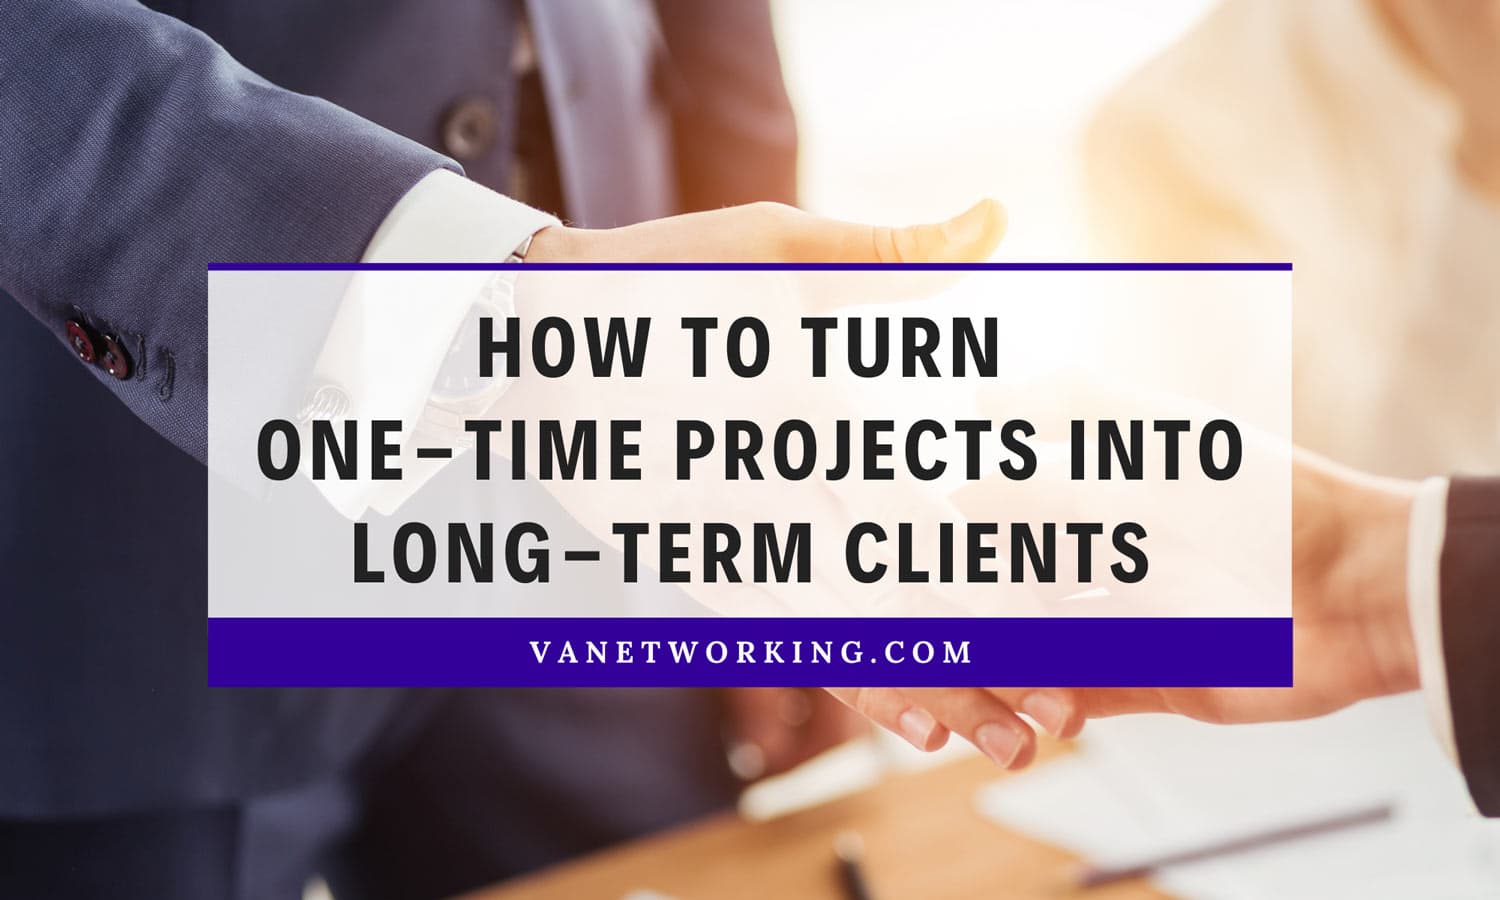 How to Turn One-Time Projects into Long-Term Clients